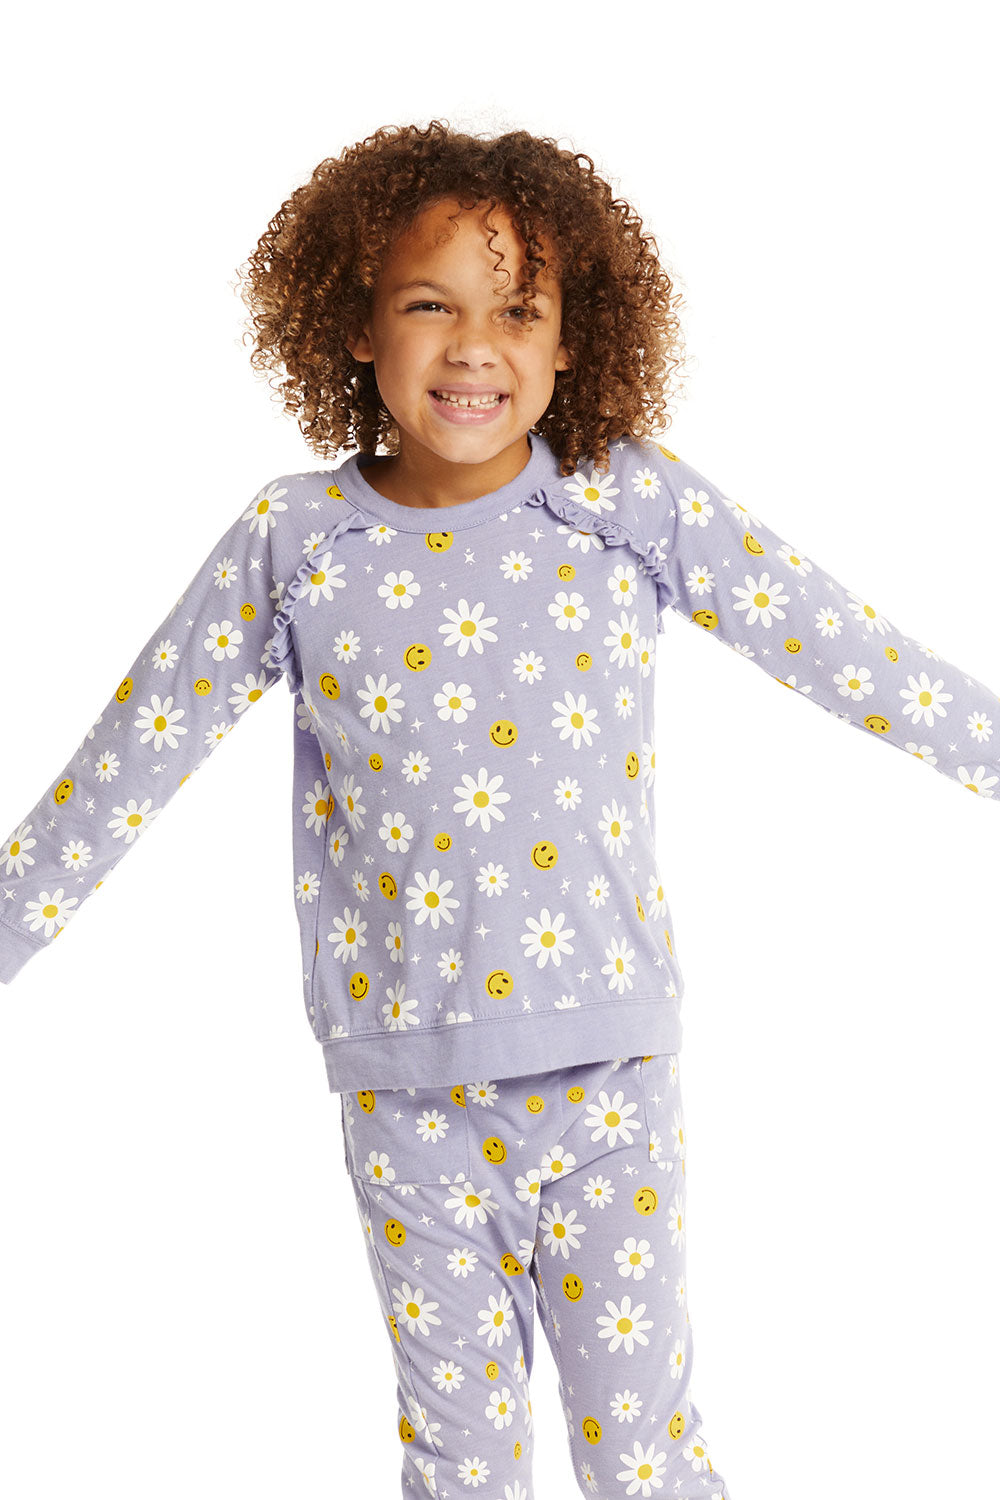 Smiley Daisies Long Sleeve Ruffle Top GIRLS chaserbrand